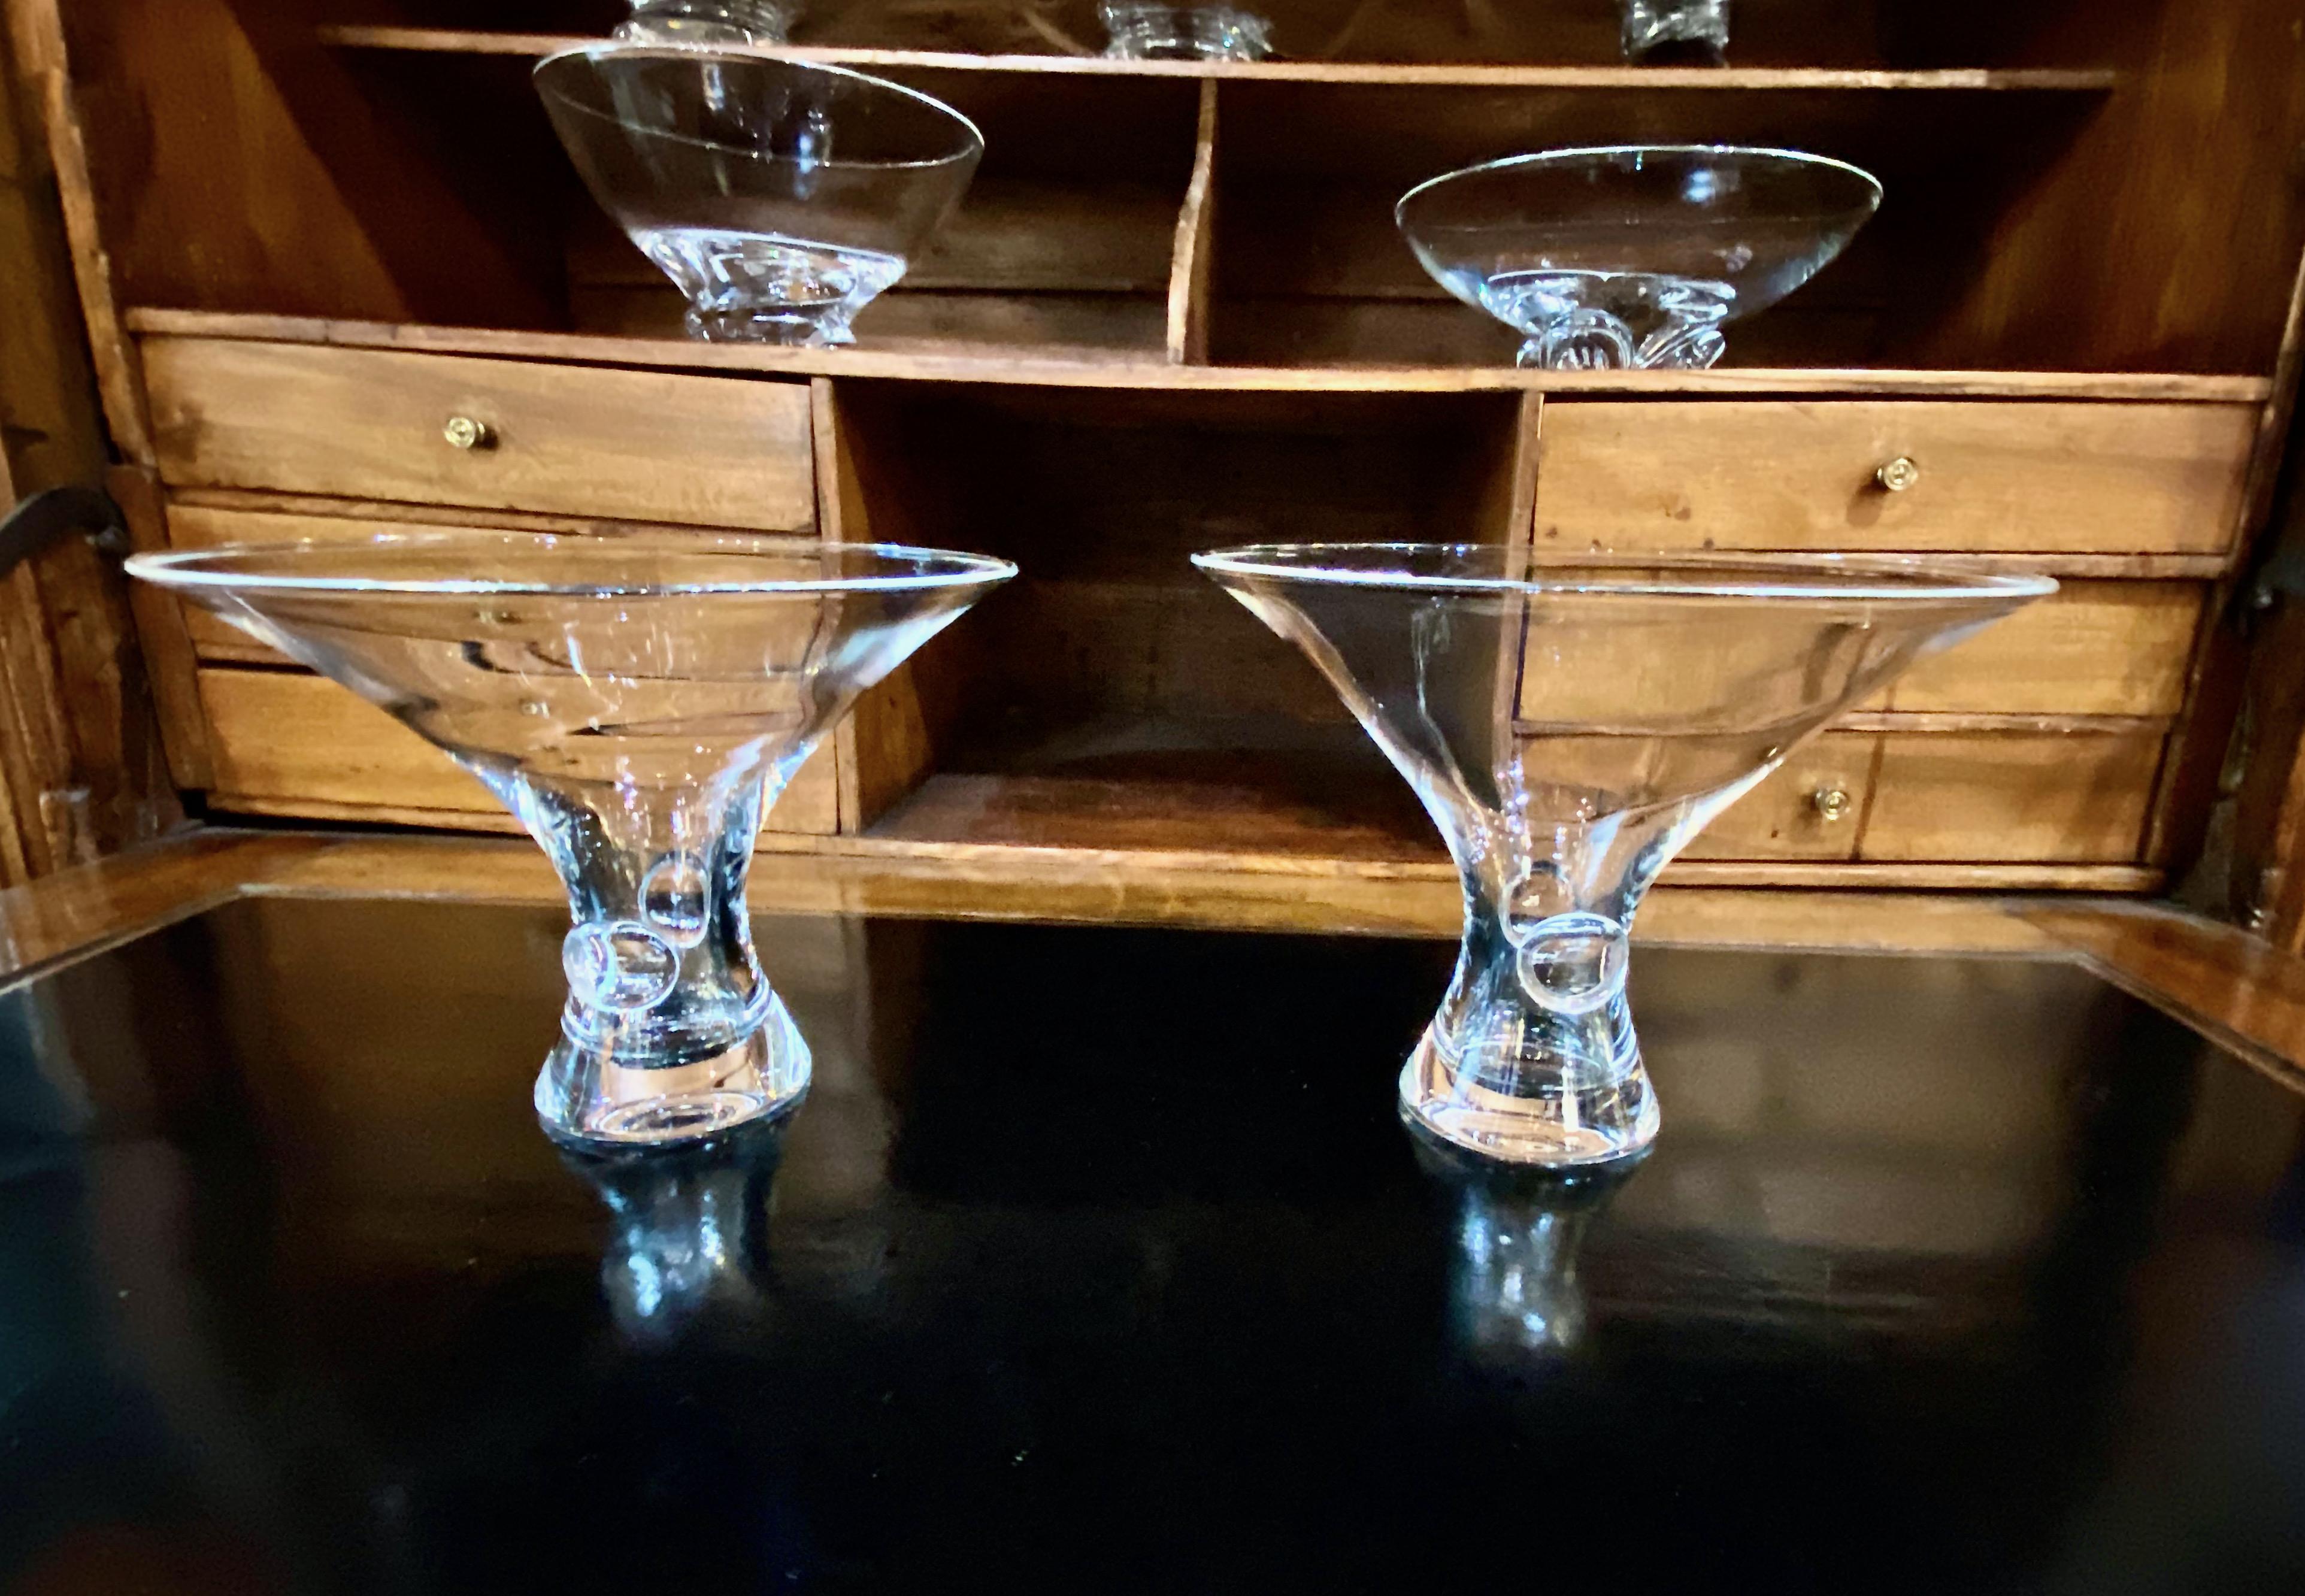 This is an iconic pair of Steuben glass vases in the 